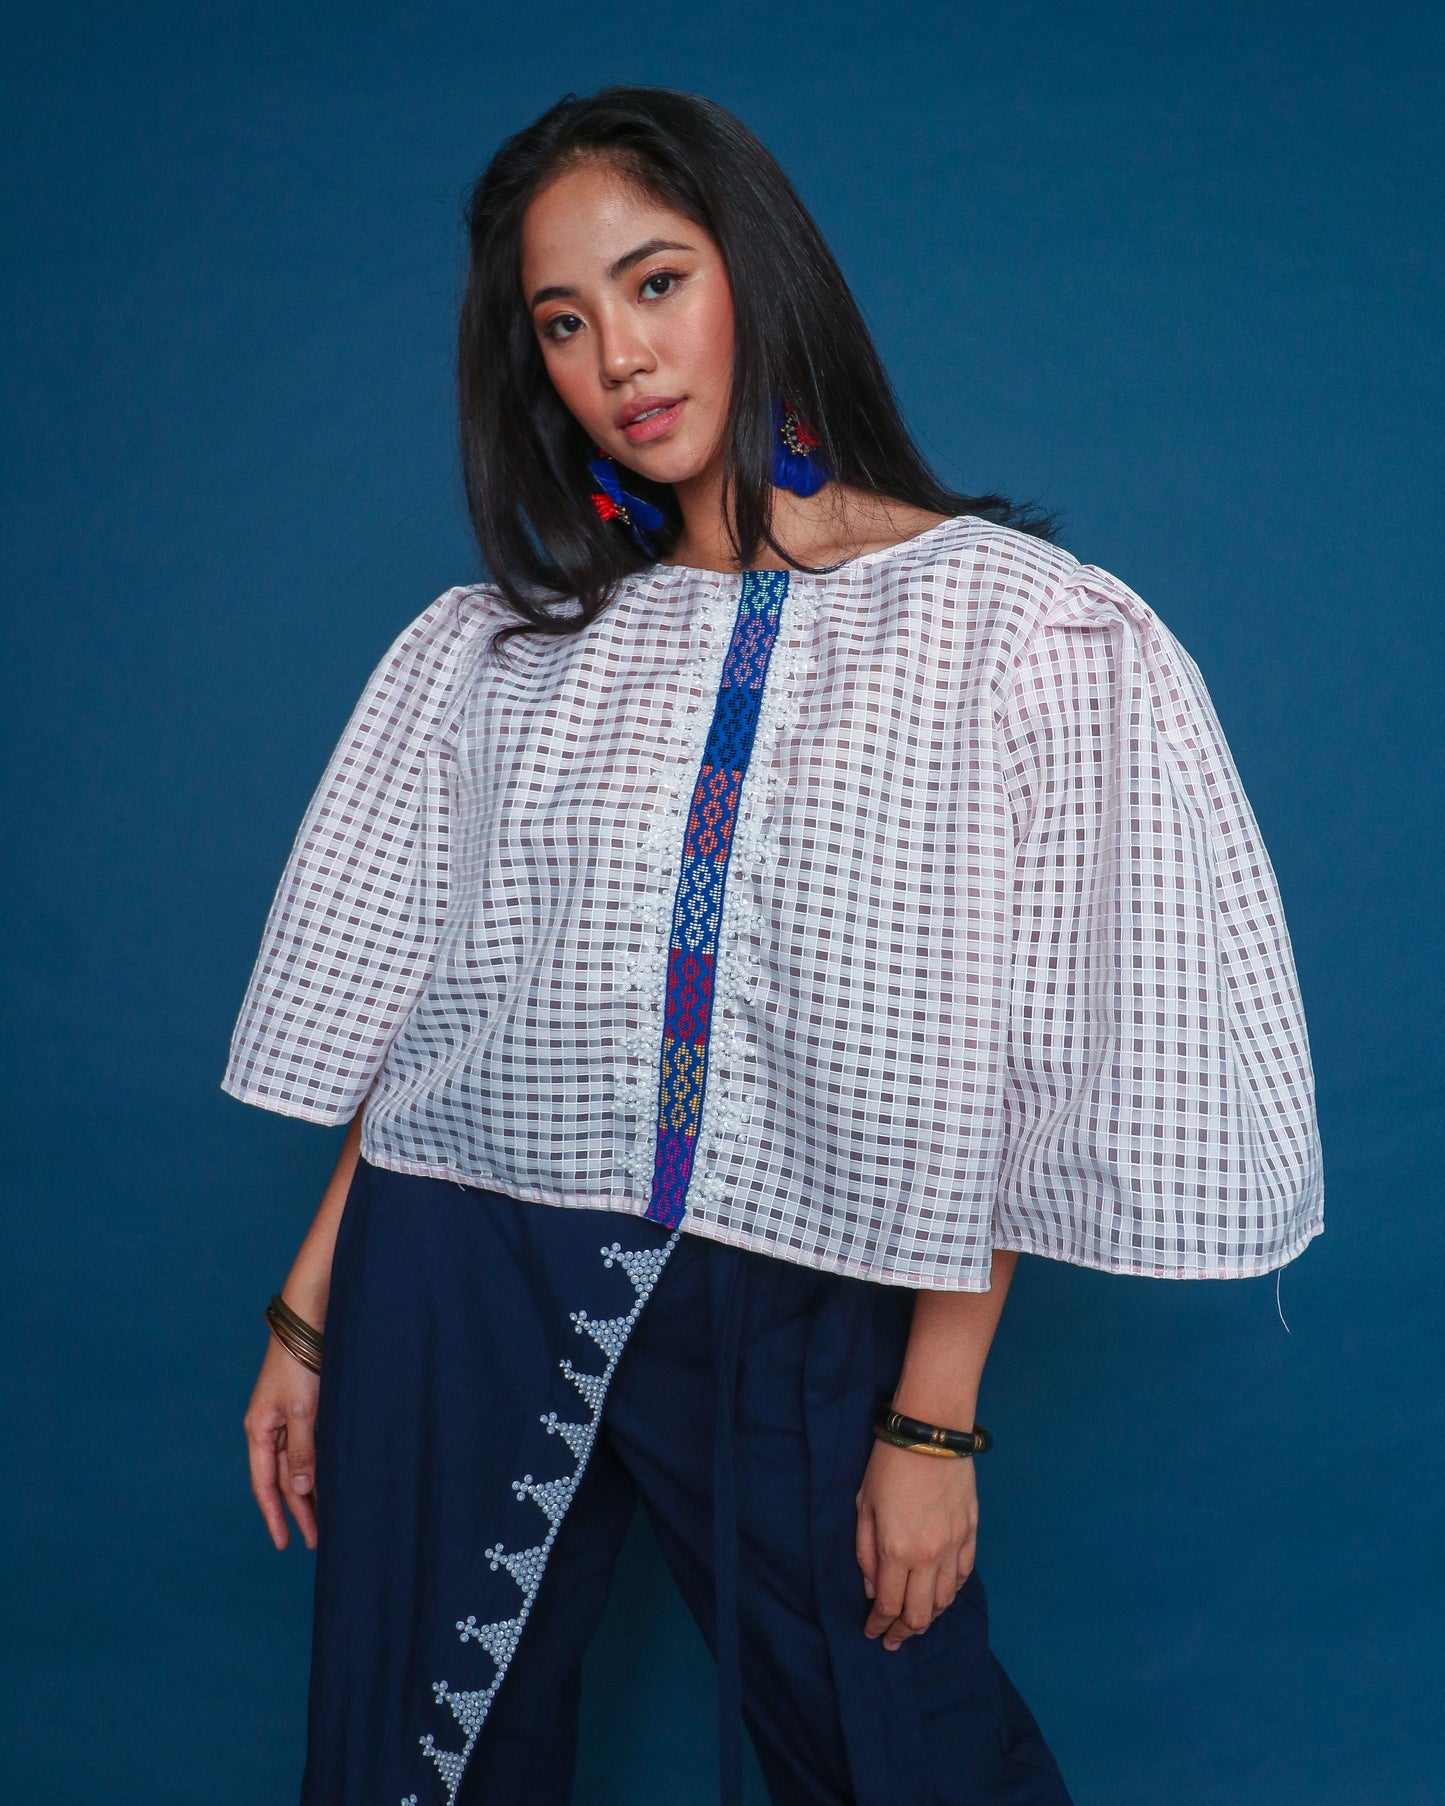 Blusang Puti with Puffed Sleeves & Langkit Strap of Marawi